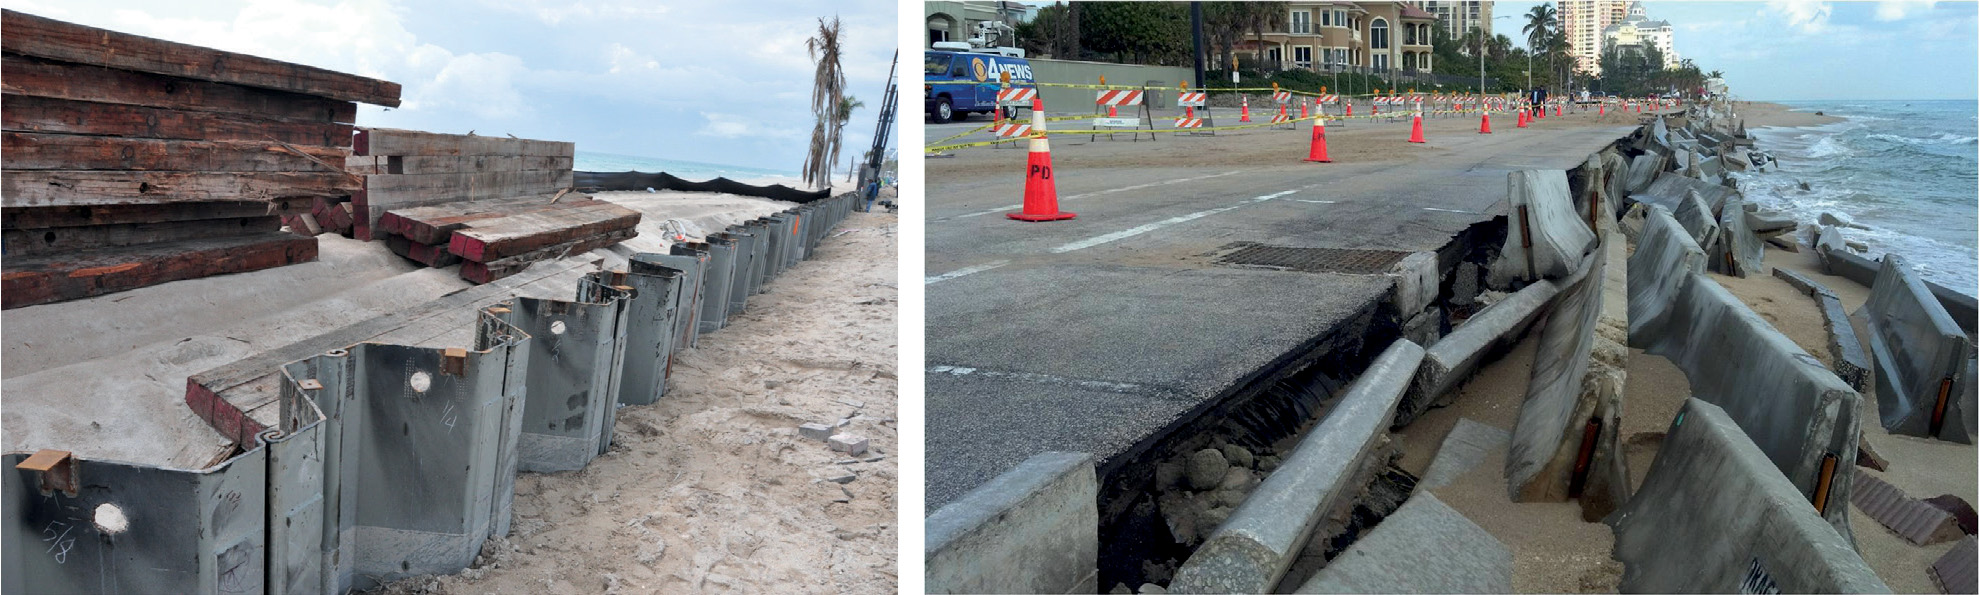 Figure 3: Hurricane-related Damages and Emergency Repairs, Photos Provided by FDOT